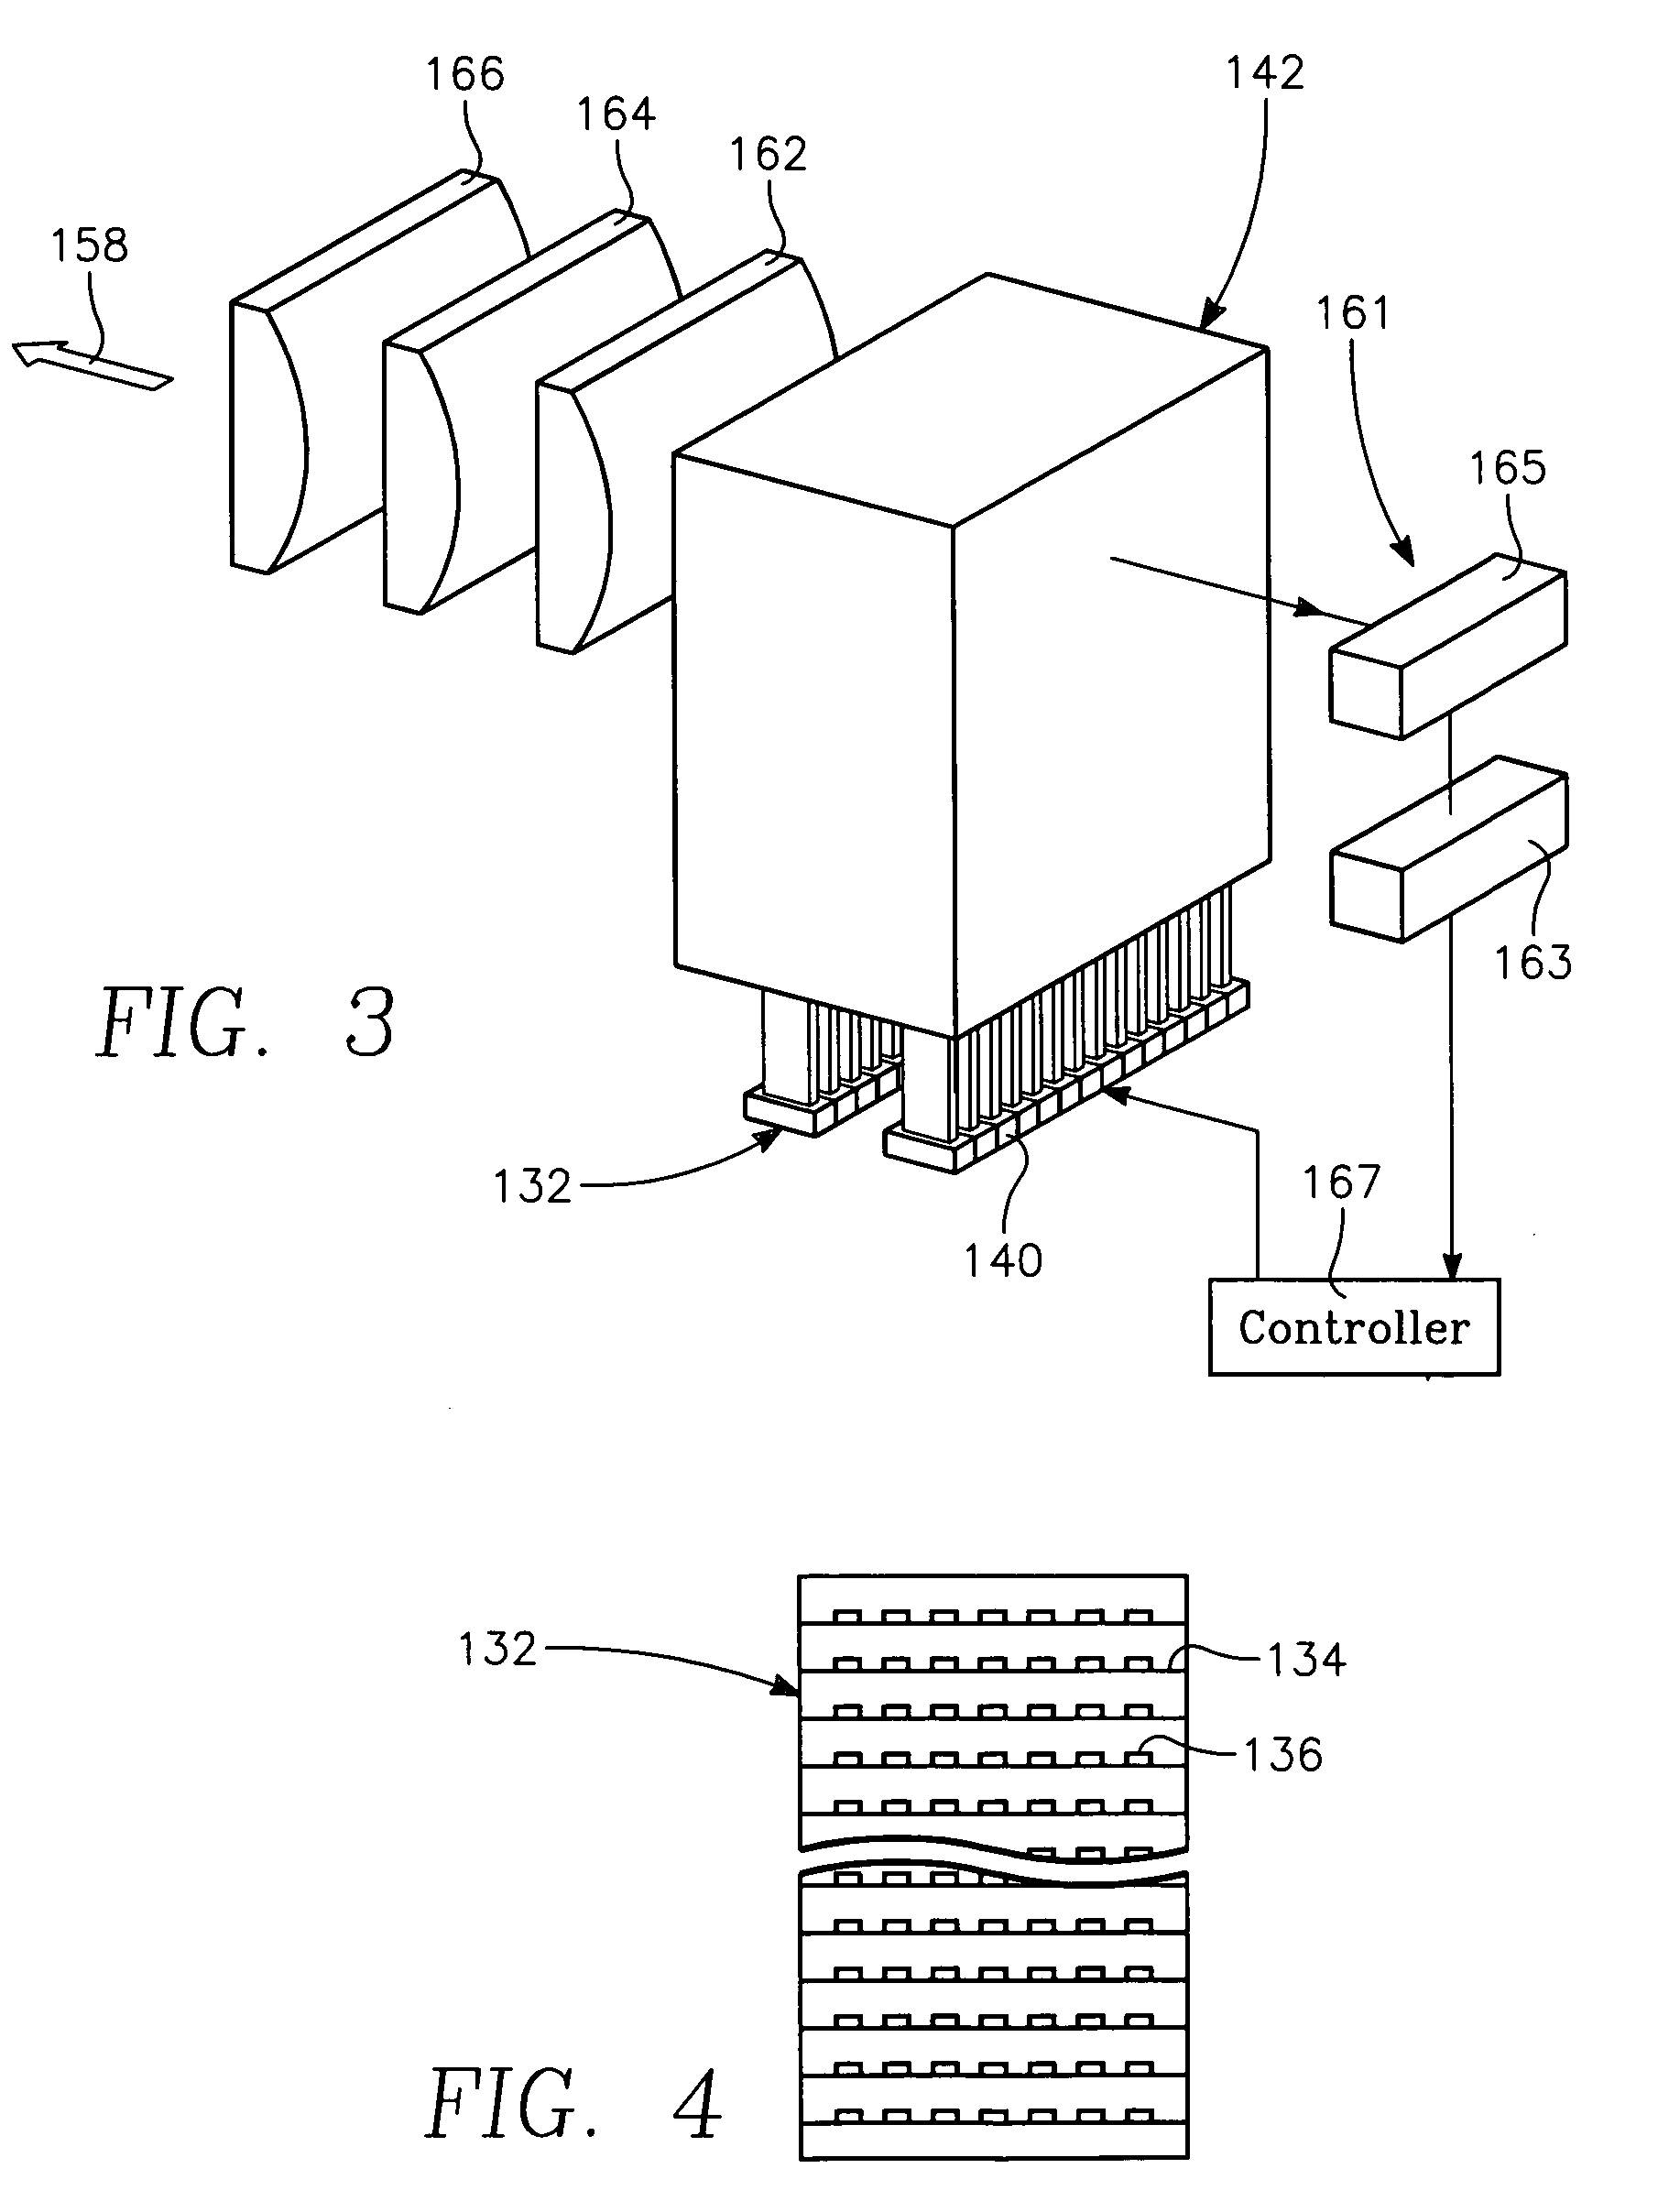 Process for low temperature plasma deposition of an optical absorption layer and high speed optical annealing